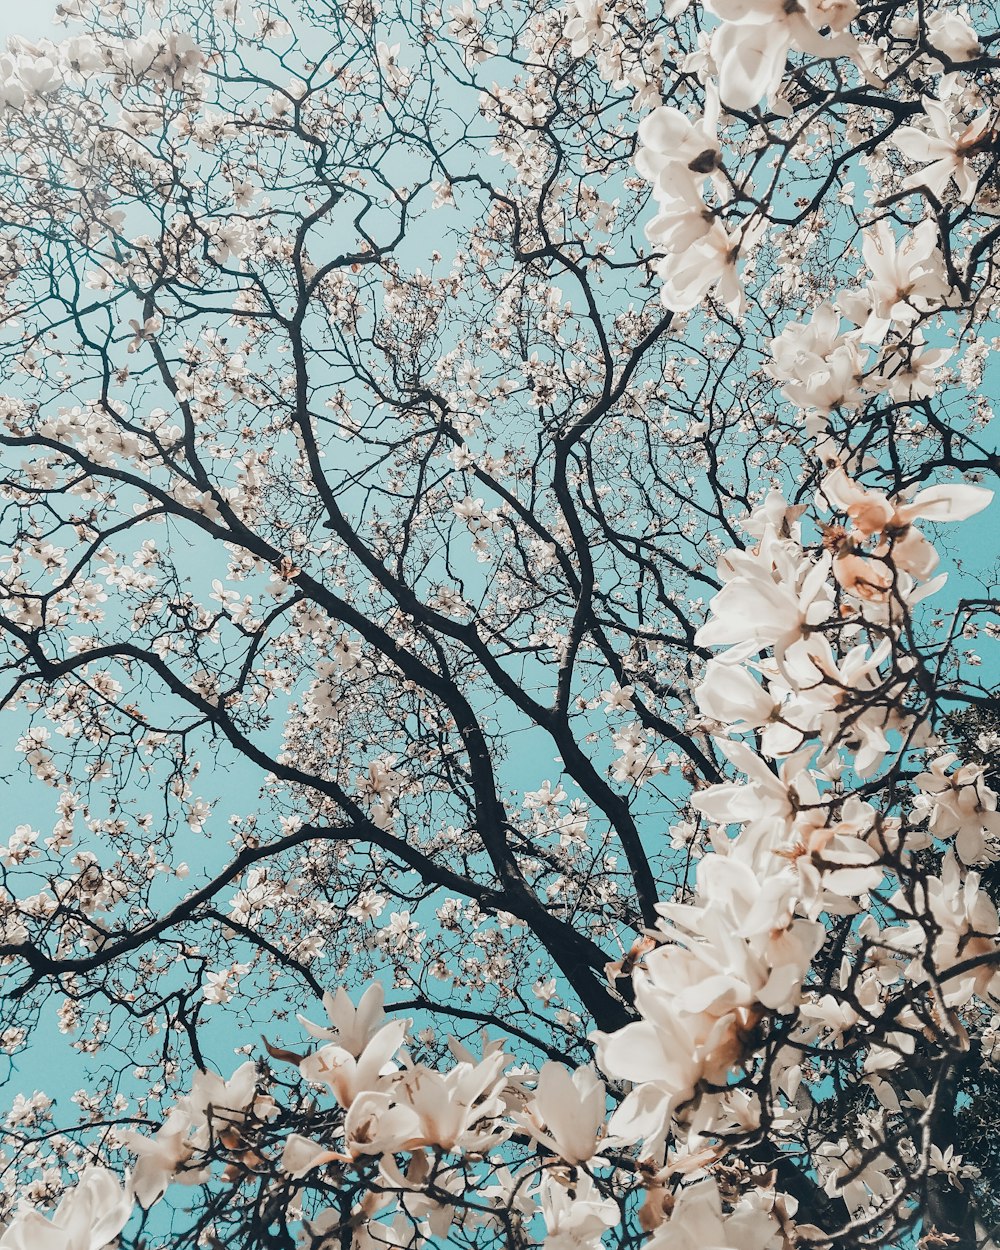 550+ Flowers Background Pictures | Download Free Images on Unsplash